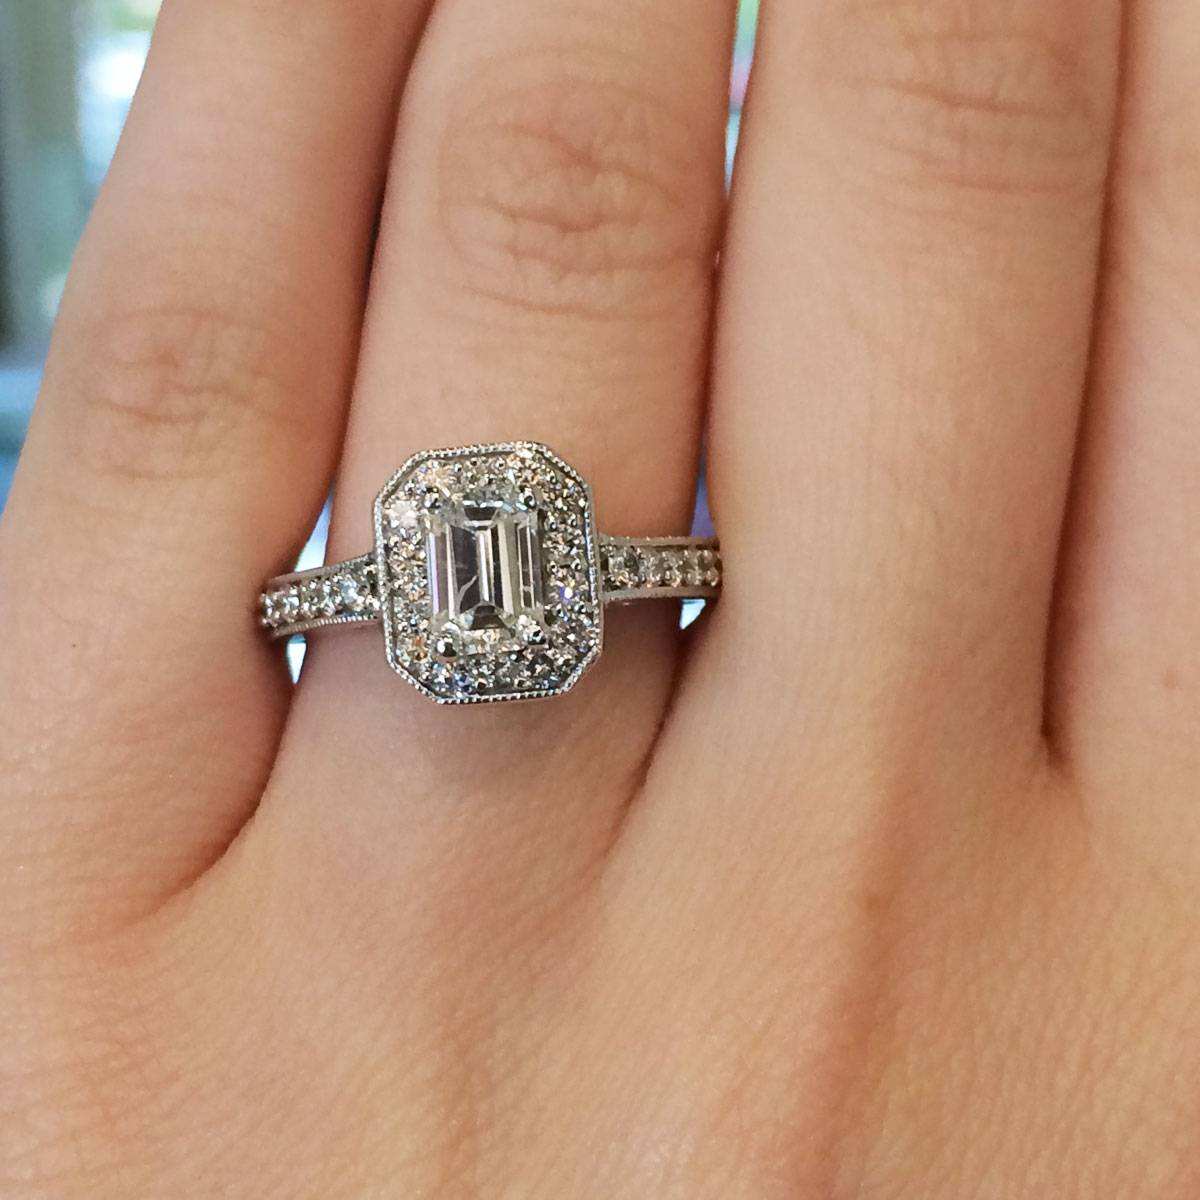 White gold emerald cut halo engagement ring